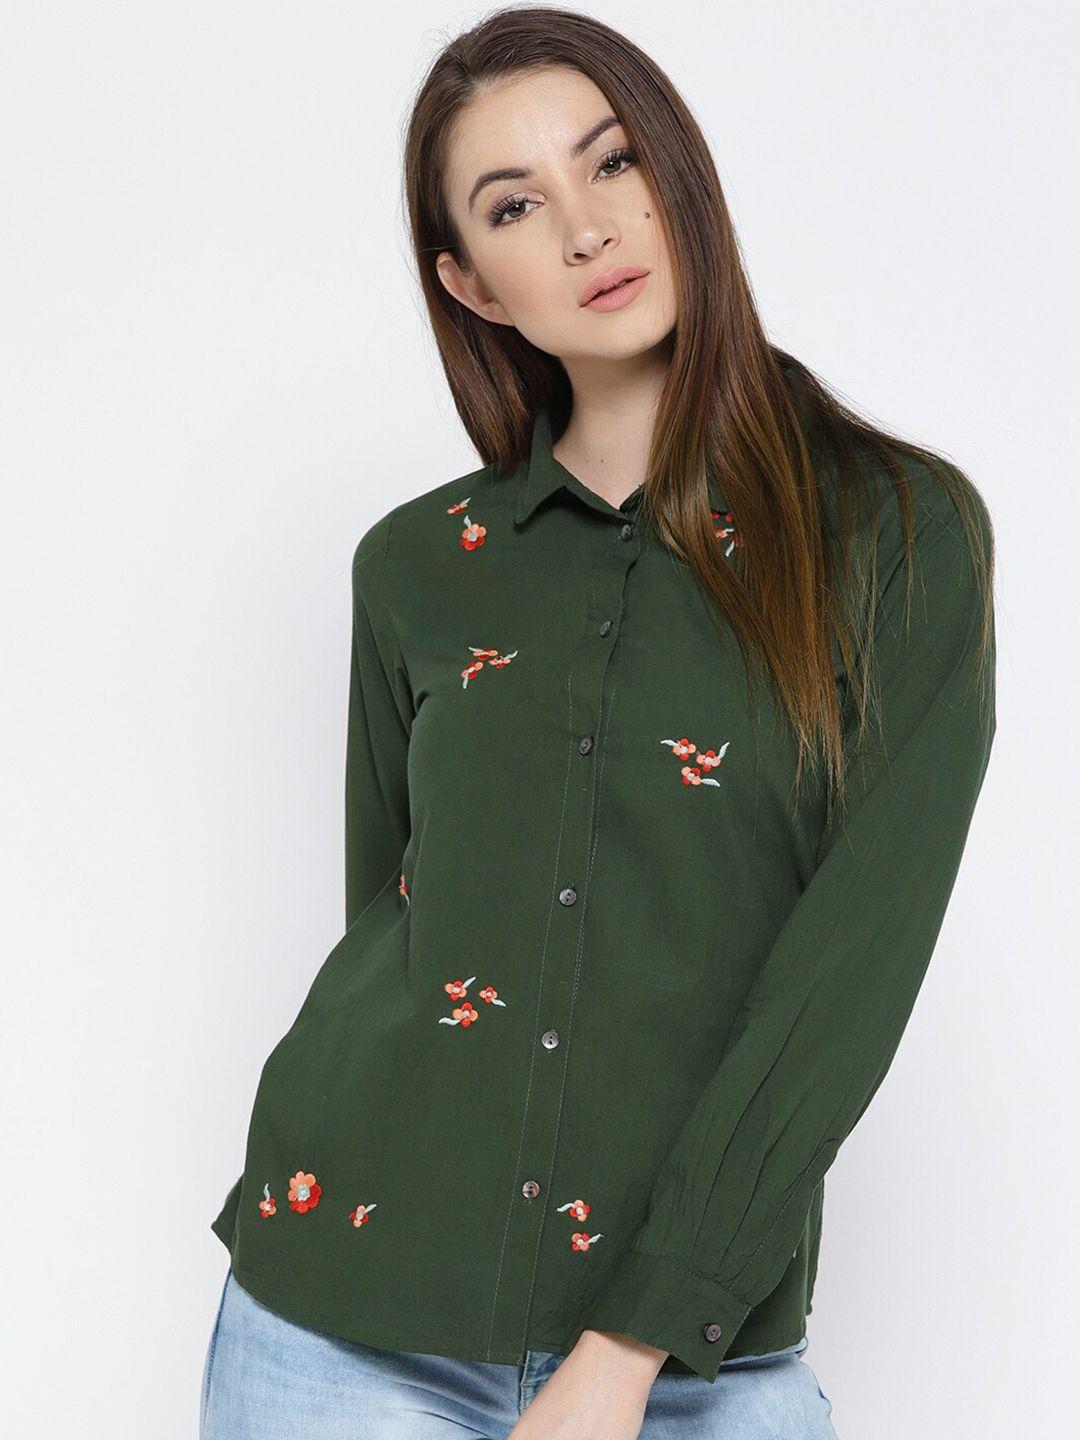 scoup olive green floral embroidered puff sleeve shirt style top